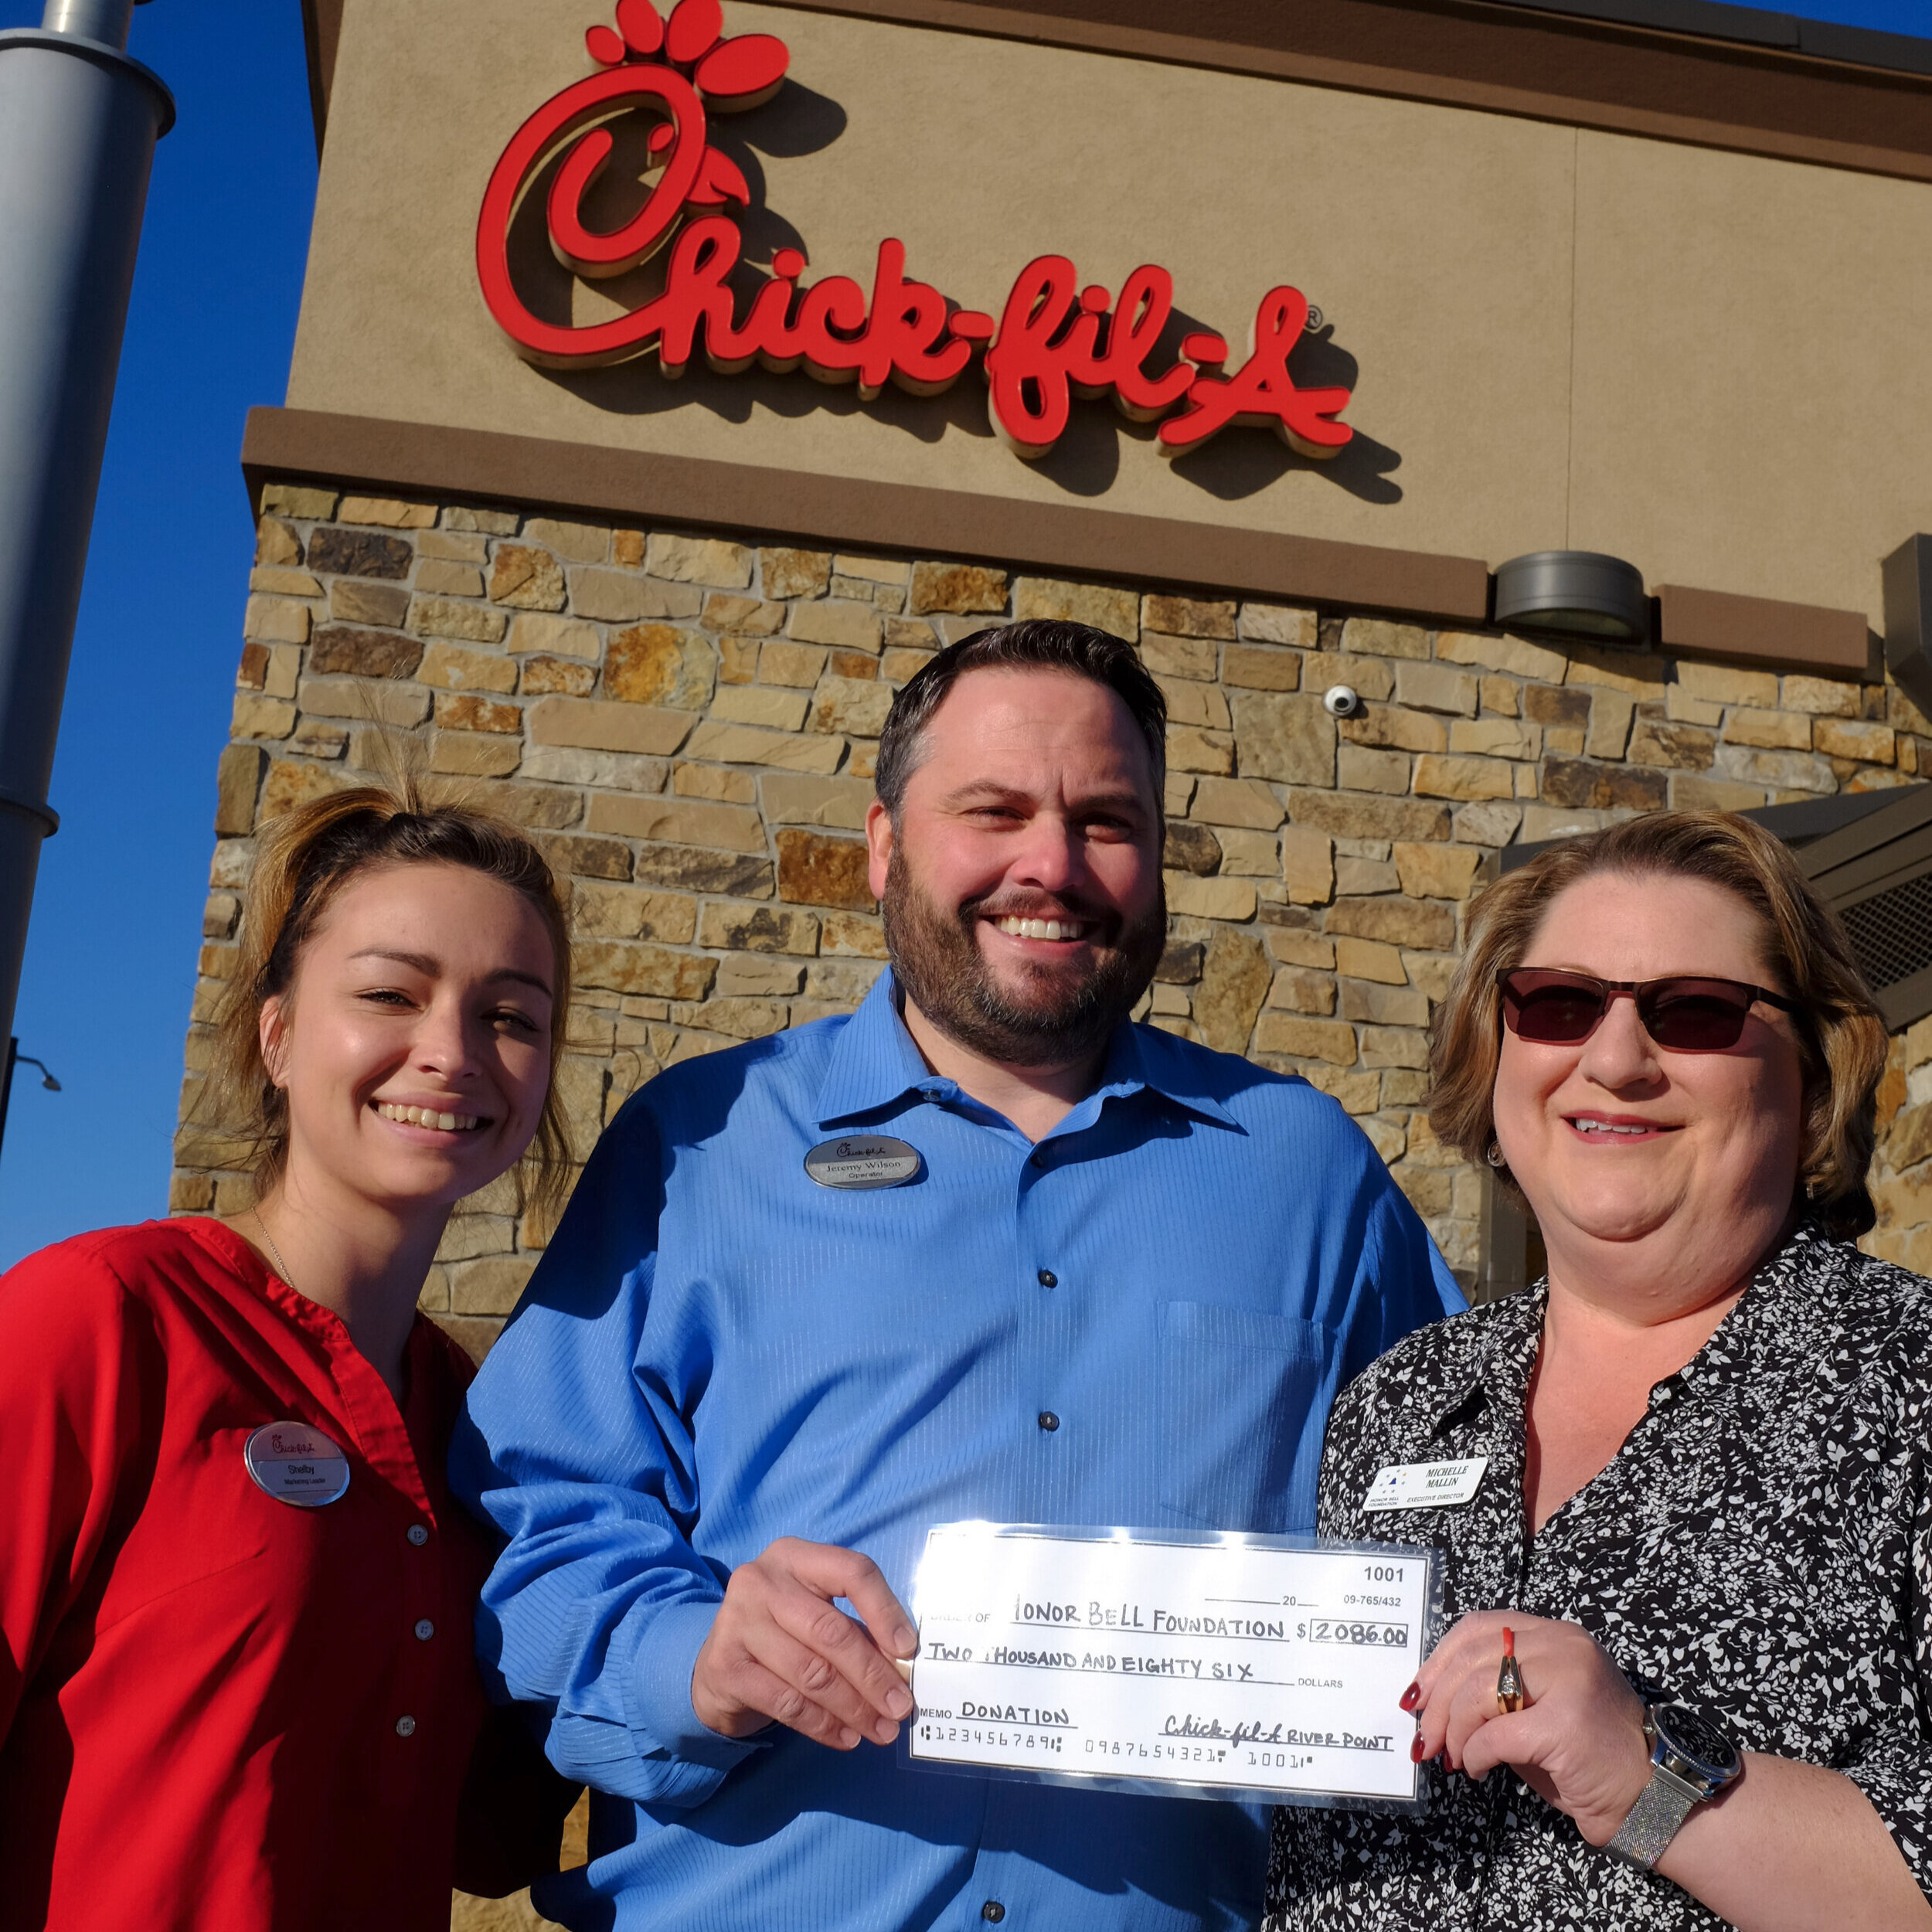 ChickfilA River Point Supports Foundation with Veterans Day donation